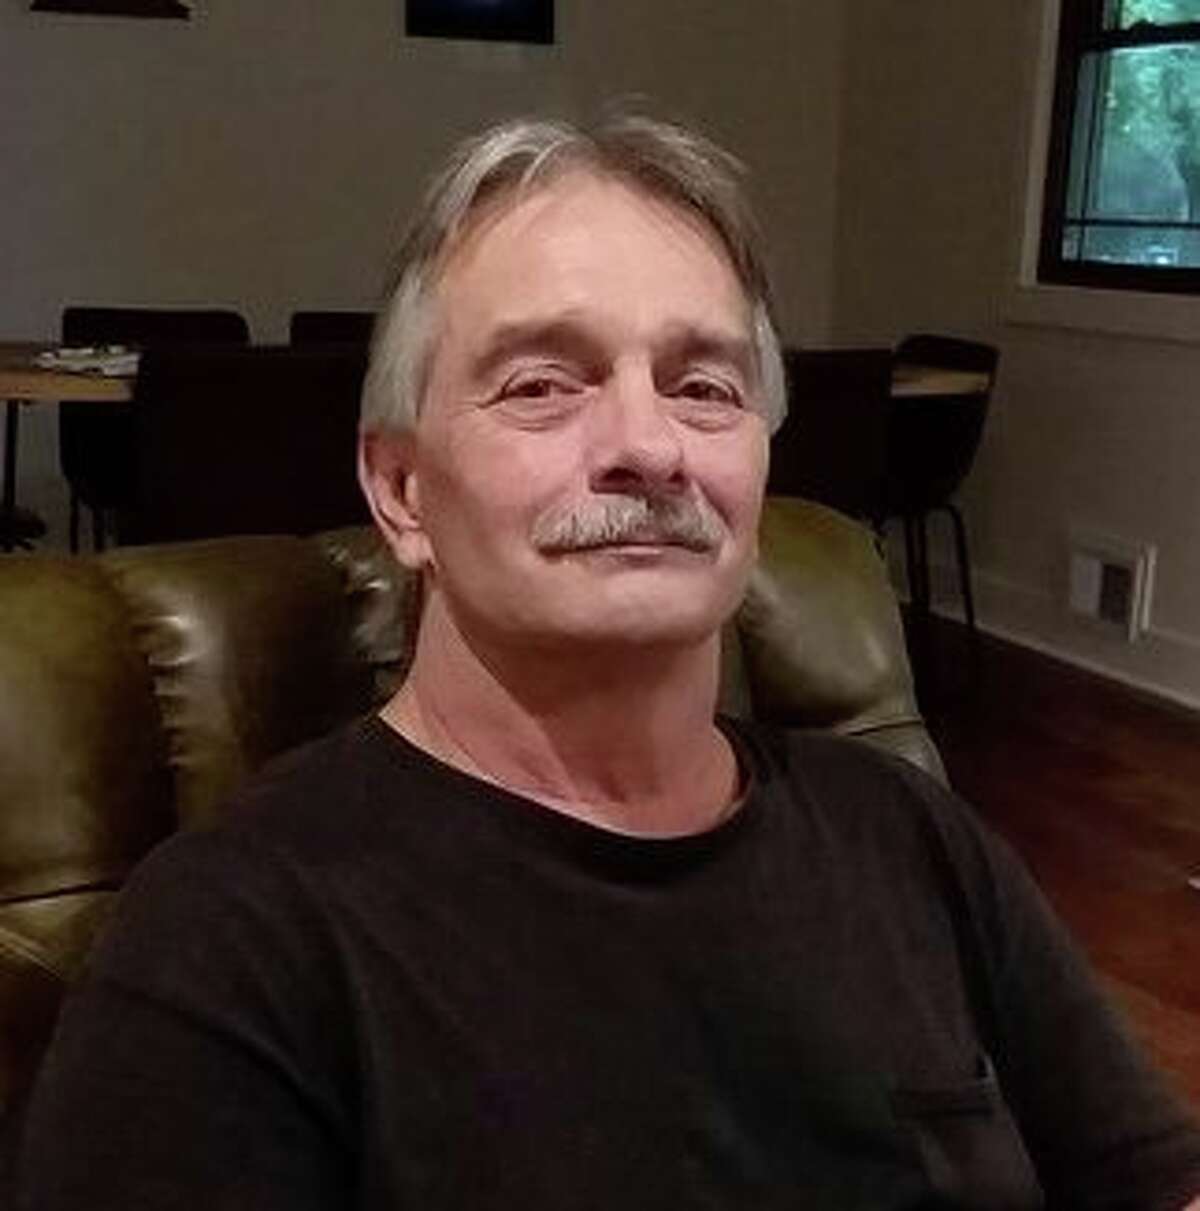 Gerald Wade Robertson, 61, was last heard from at 11:30 a.m. Monday, Nov. 28, by his daughter. She told authorities Robertson was confused about where he was, according to Michigan State Police.